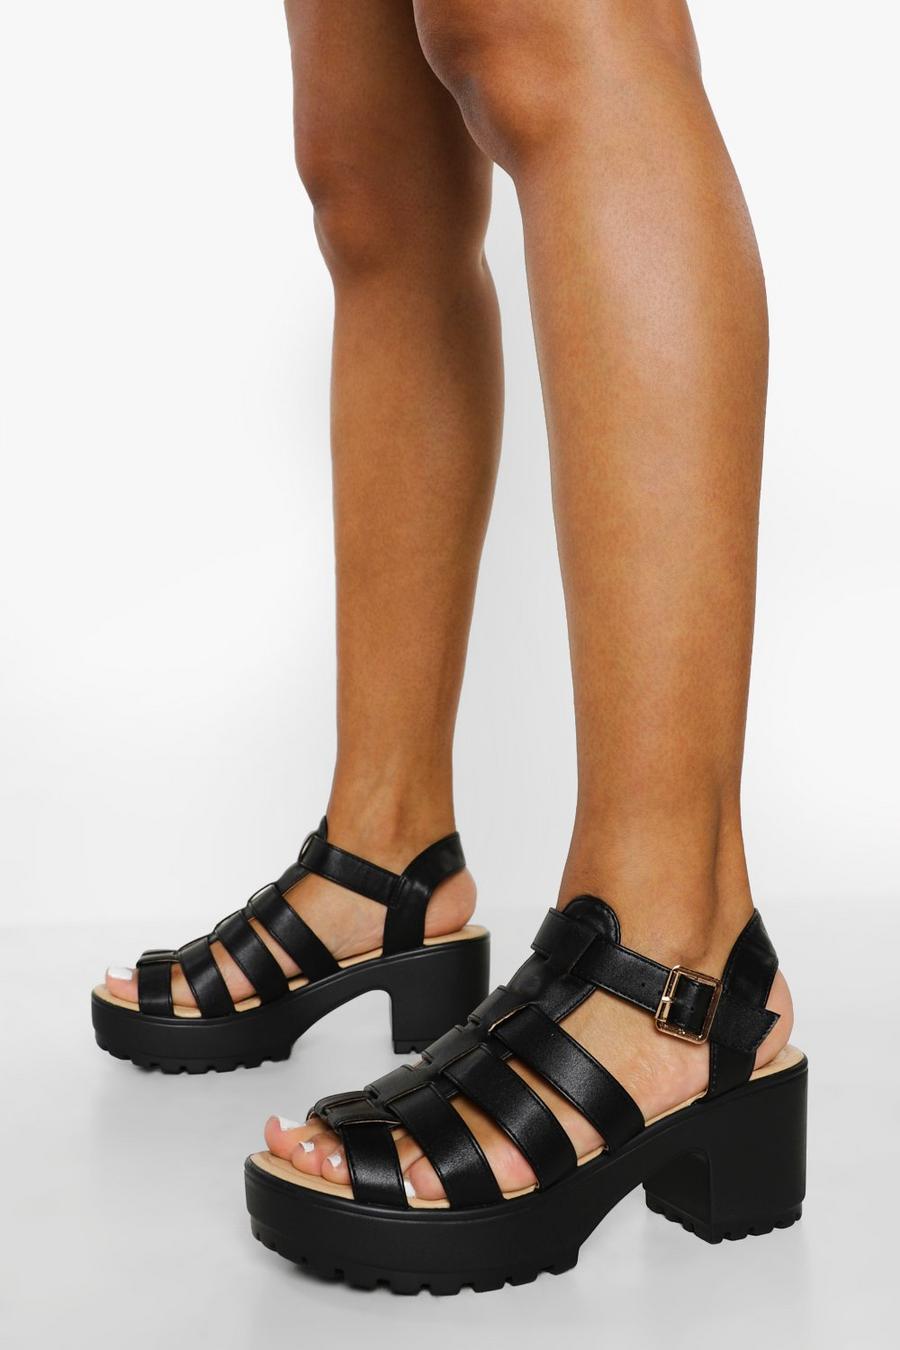 Black Fisherman Cleated Sandals